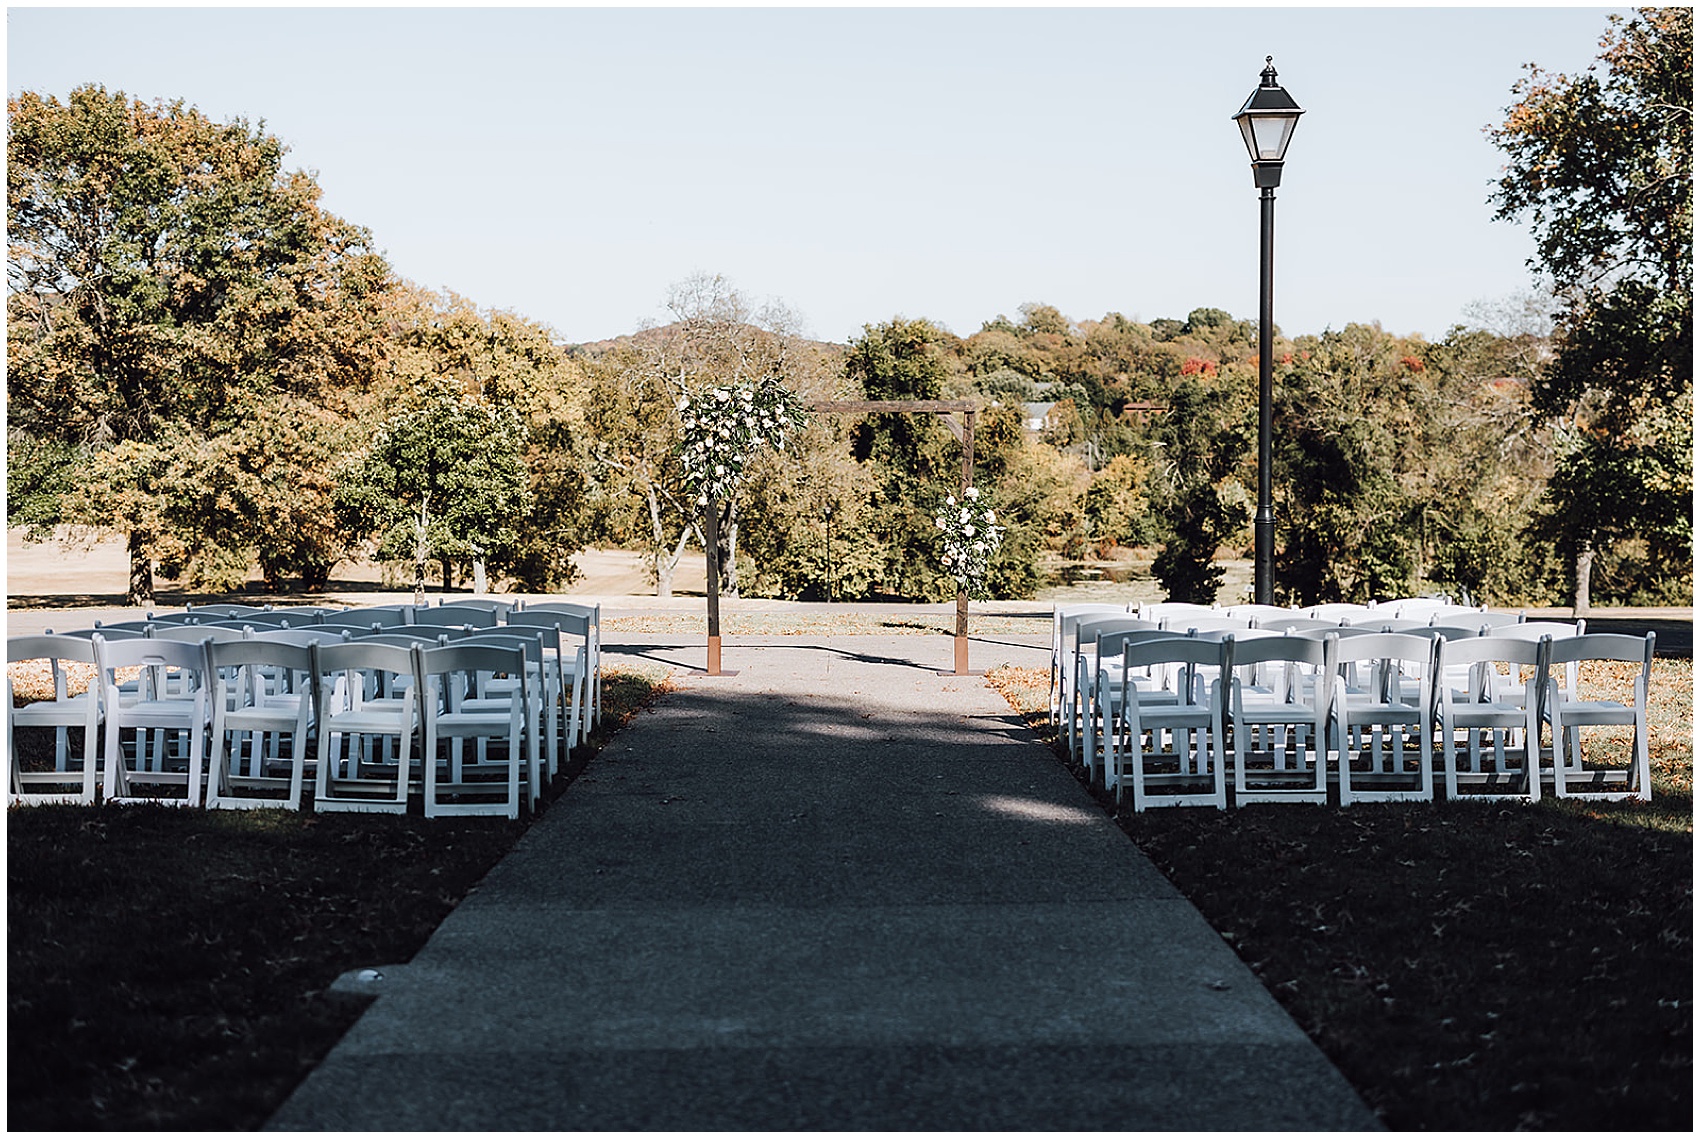 Wedding ceremony arbor and chairs decorated with white flowers